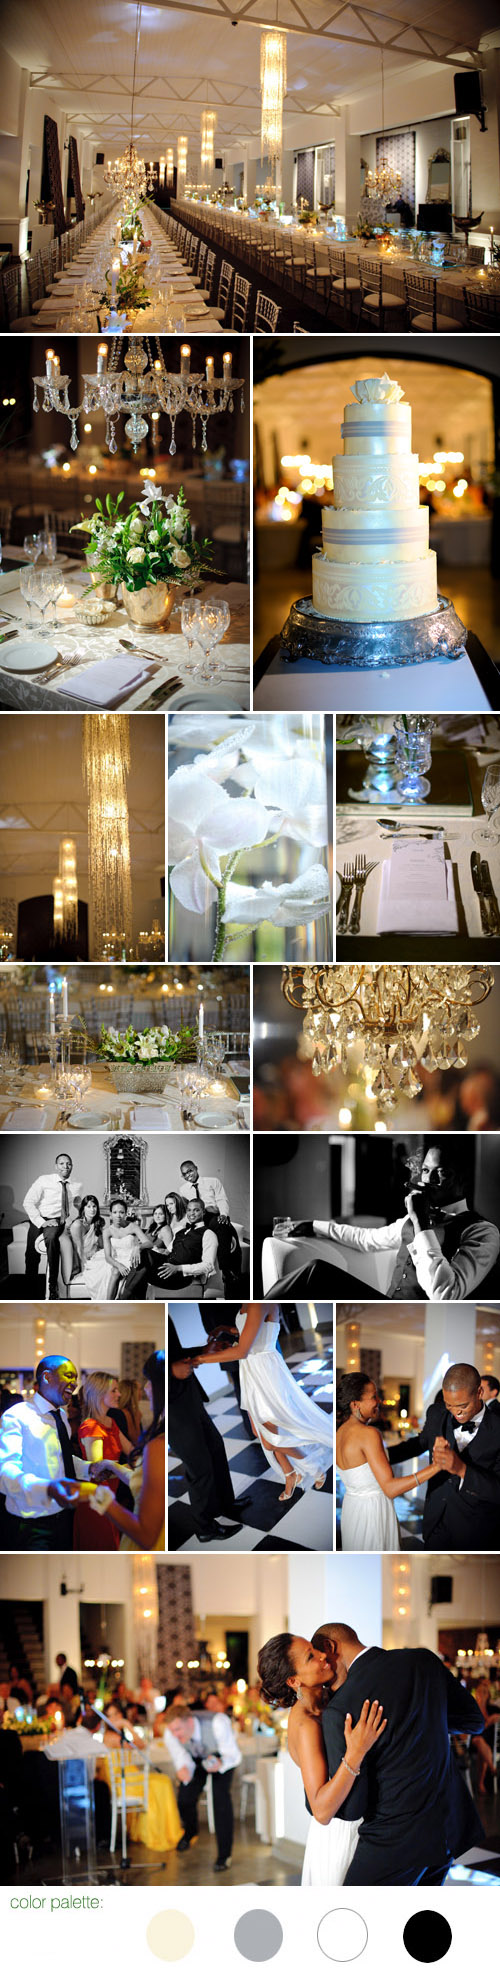 wedding reception in south africa, cream, grey-silver, off-white and black wedding color palette, images by jean pierre uys photography